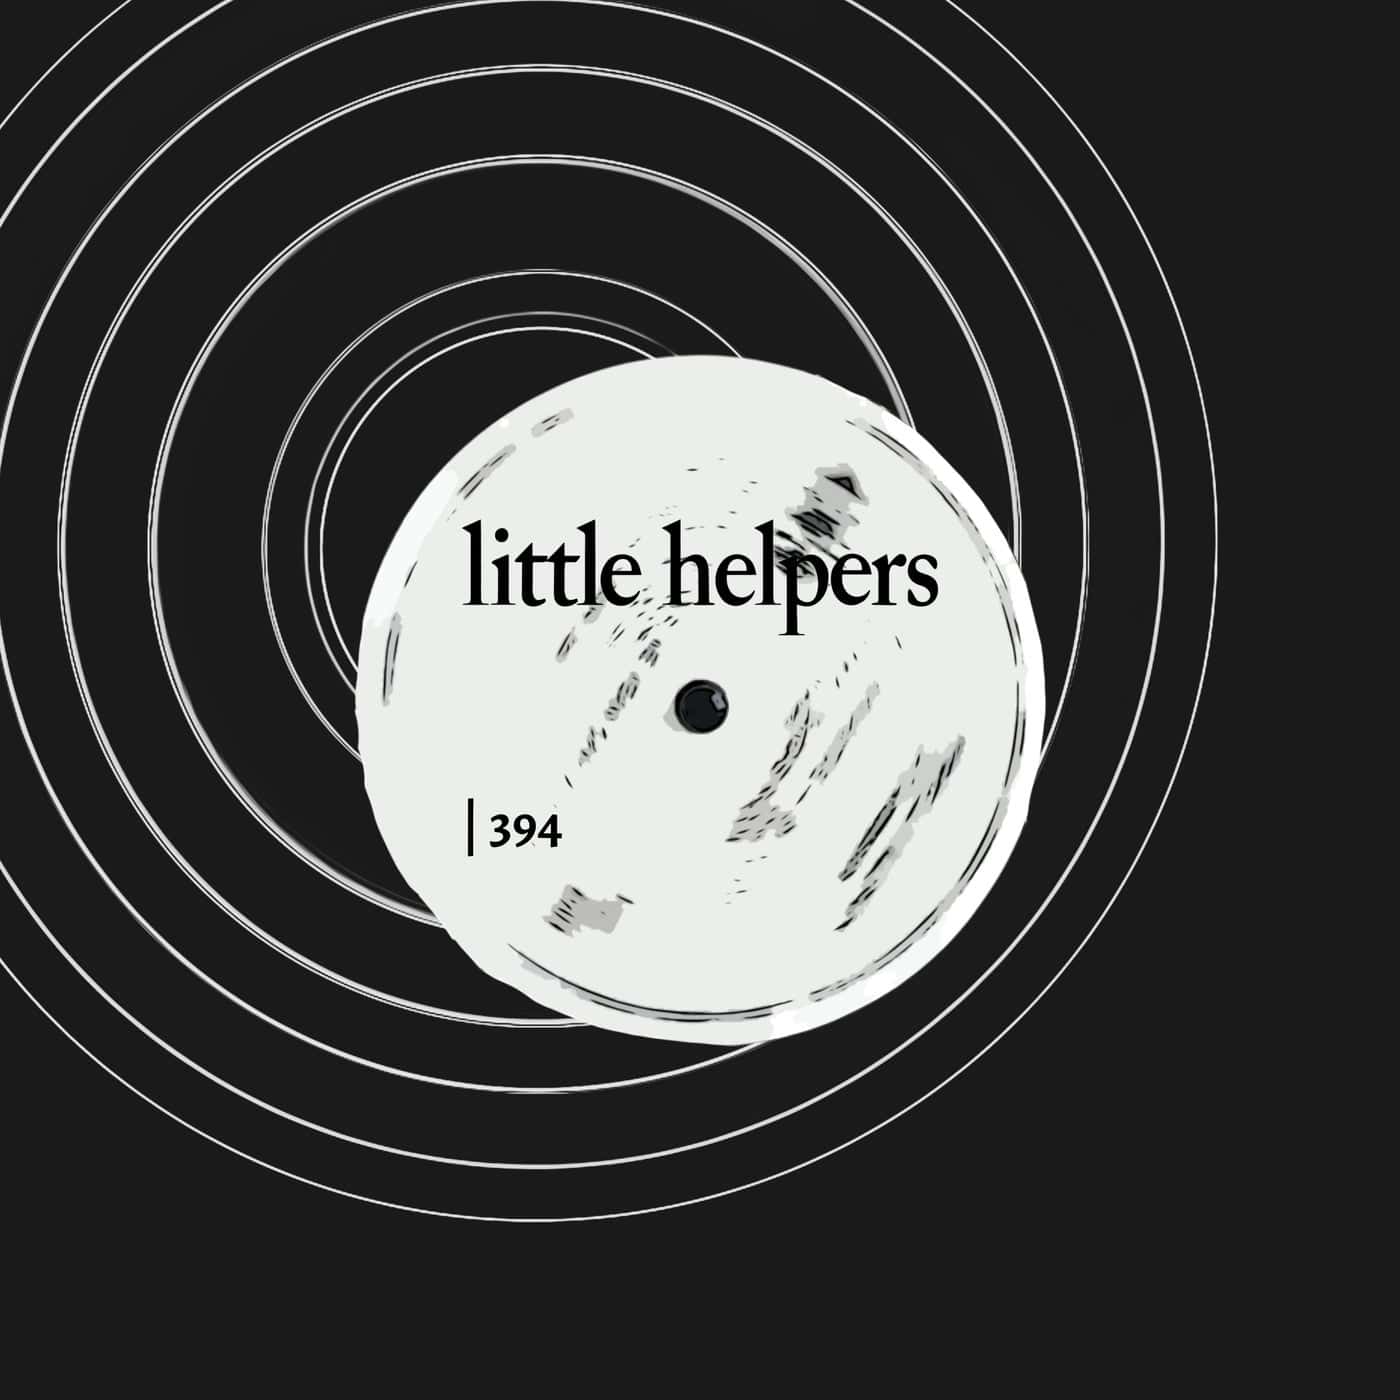 Download Prince.L - Little Helpers 394 on Electrobuzz